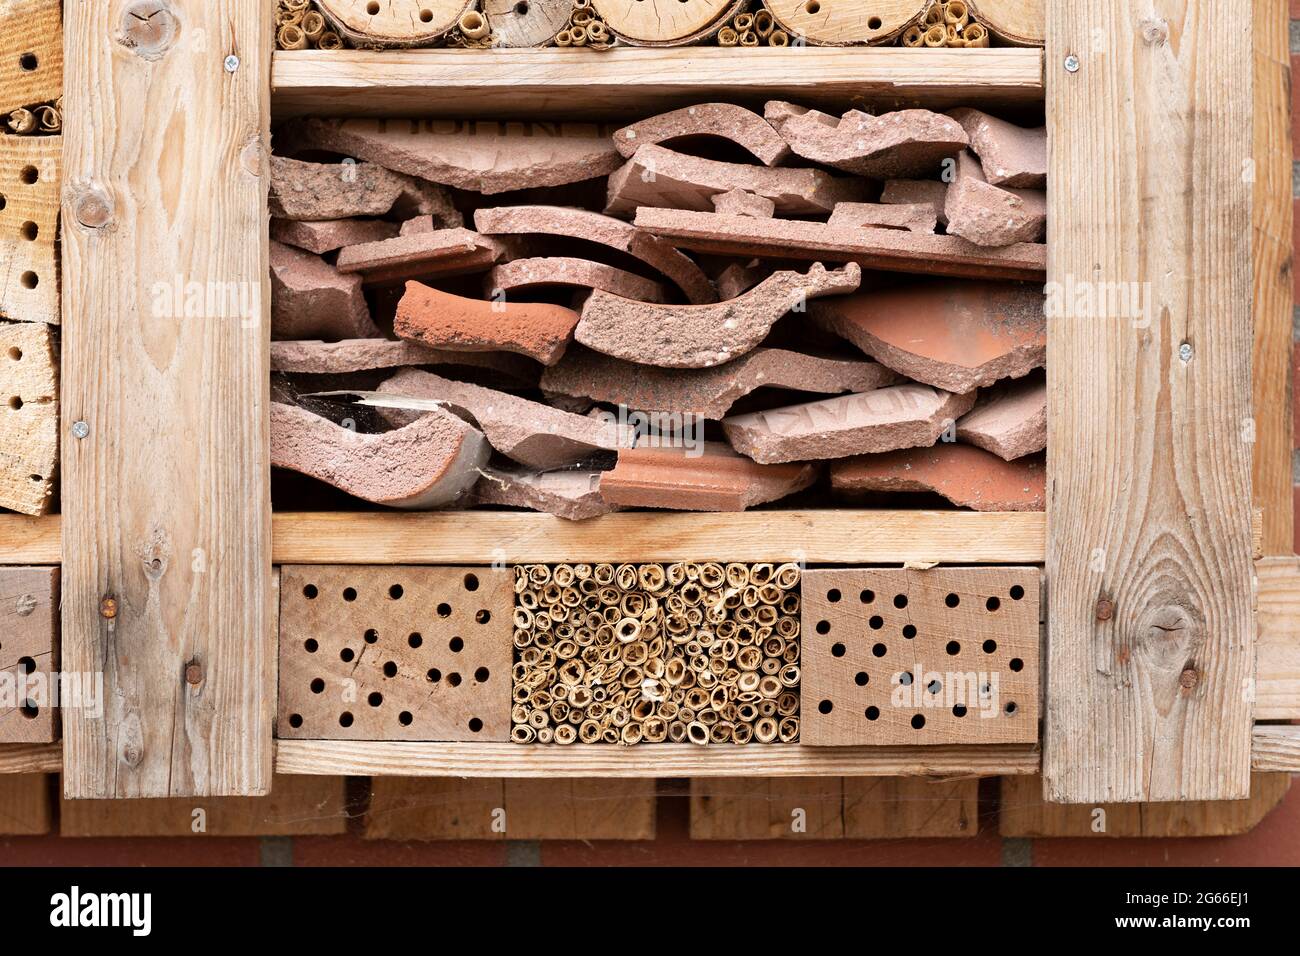 Detail of an insect hotel made of natural materials like wood, bamboo sticks, and ceramic tiles for a better biodiversity and a shelter for insects Stock Photo